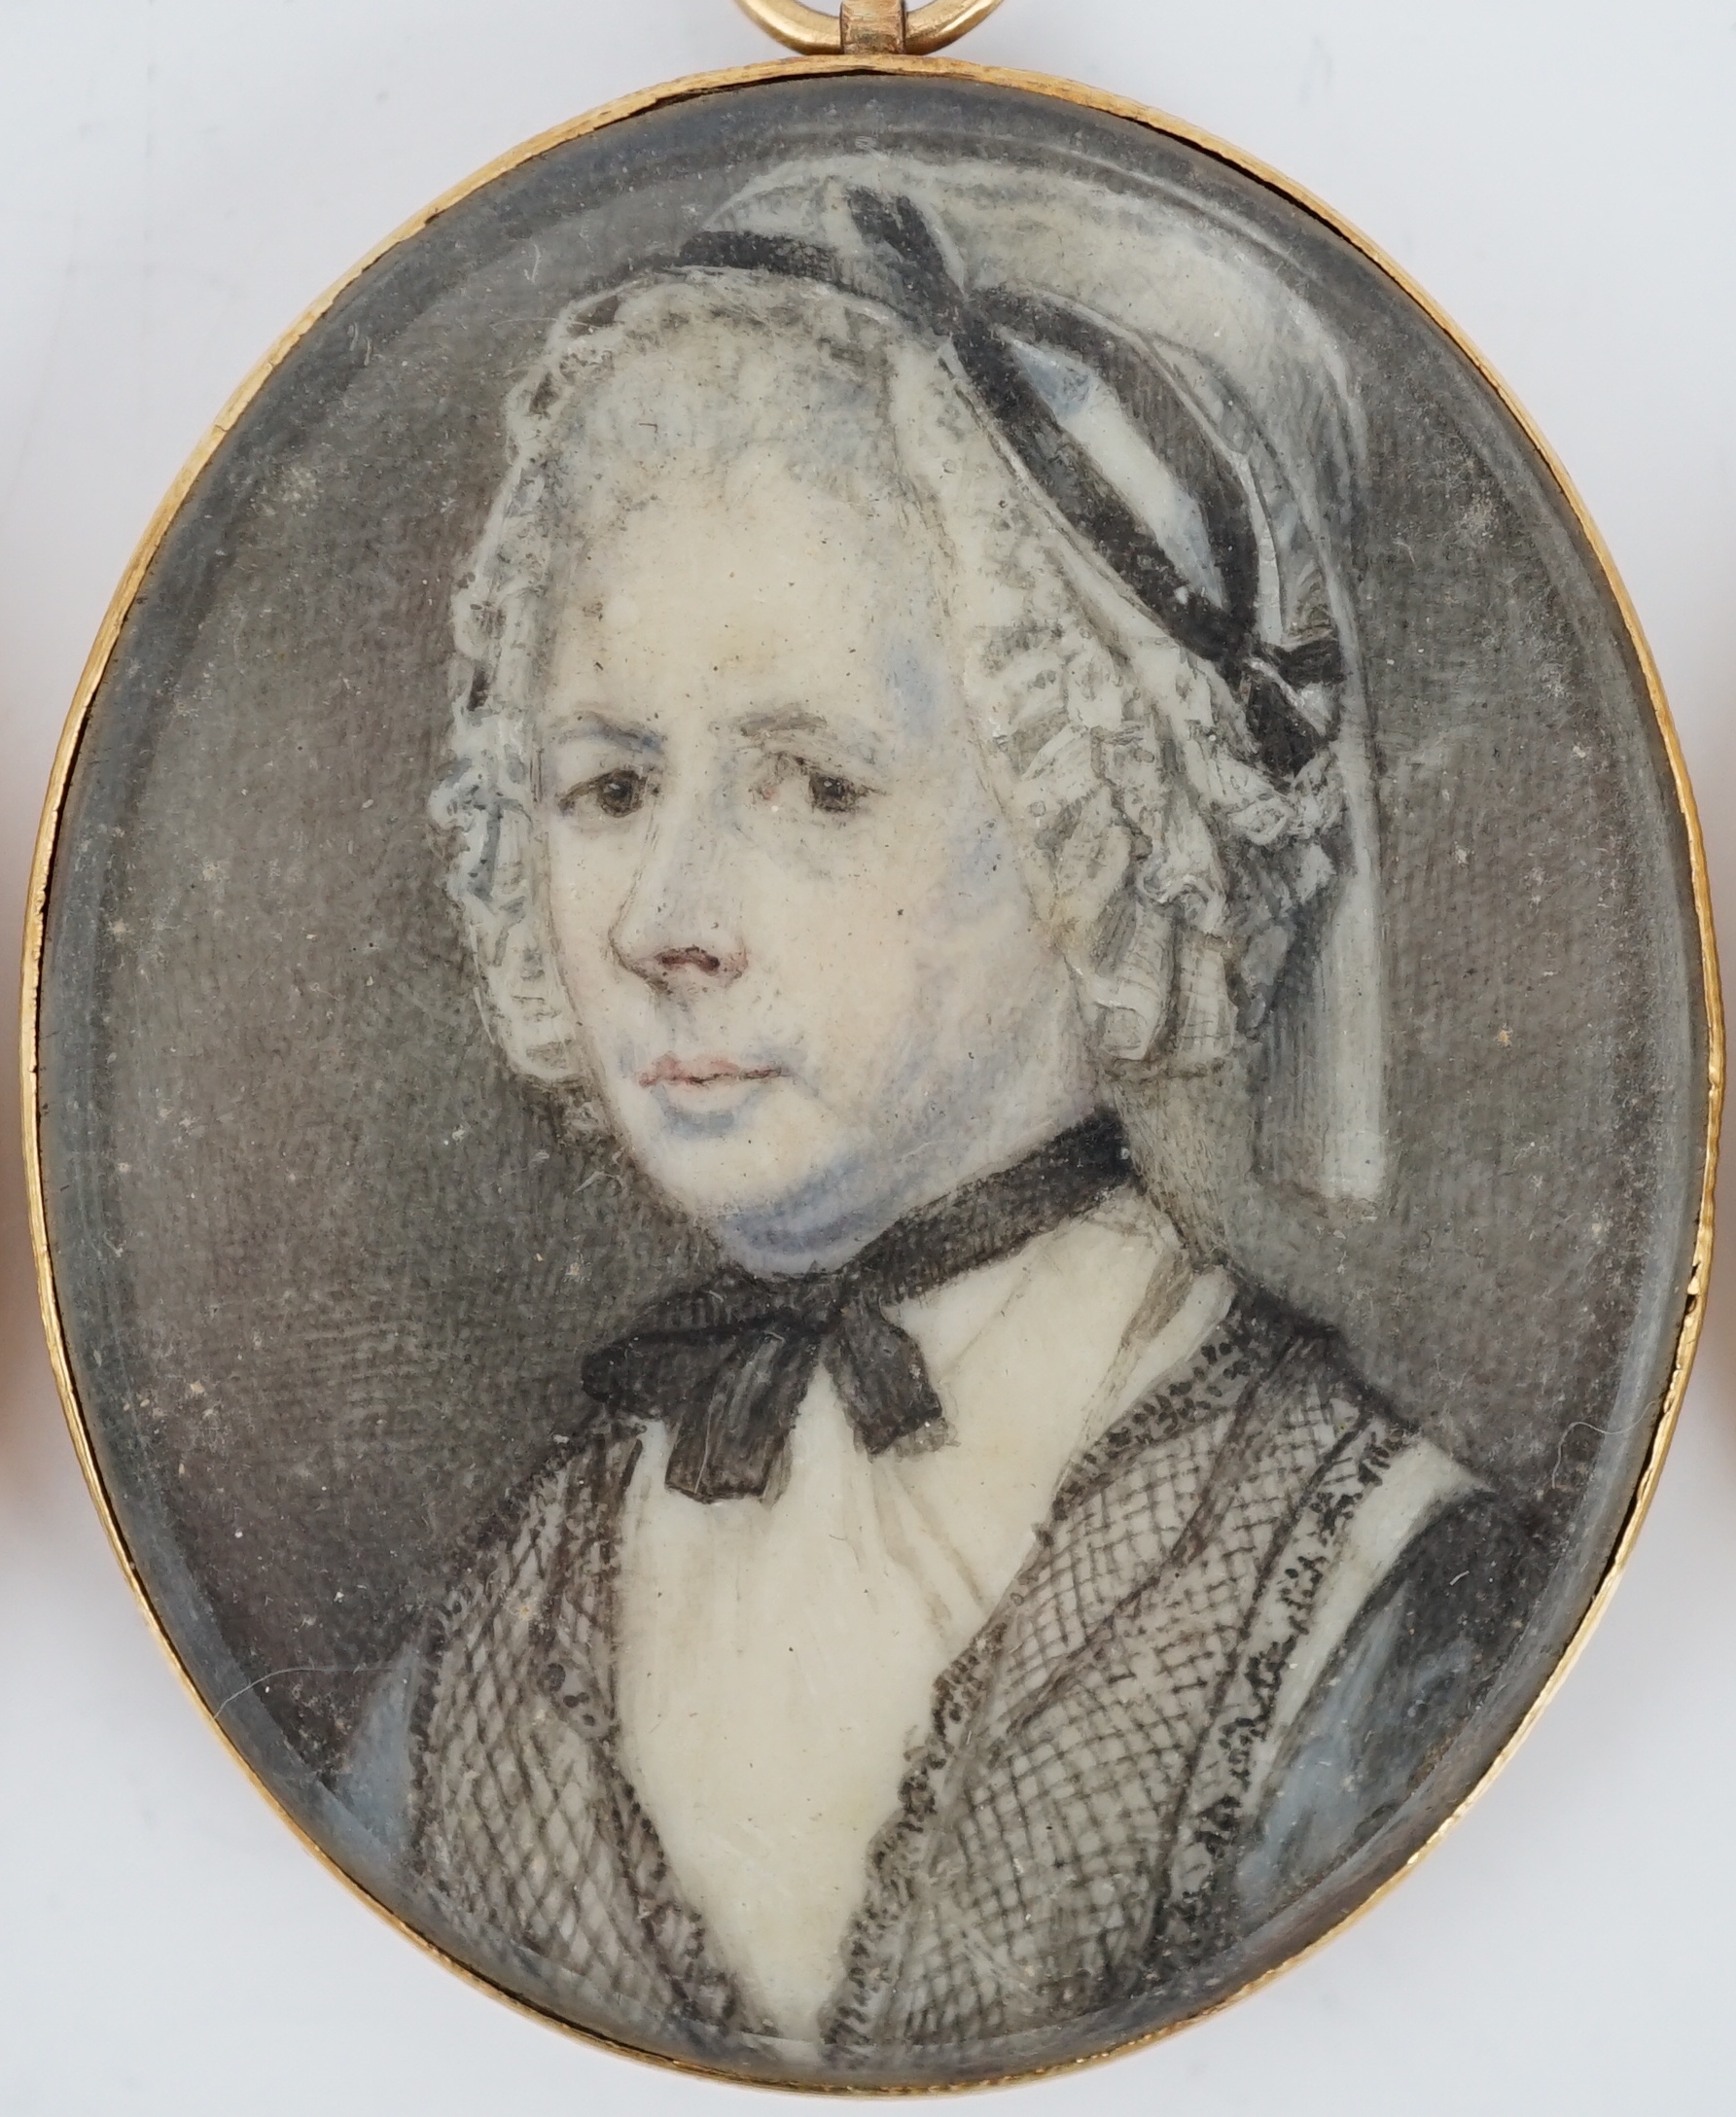 English School circa 1800, A set of three portrait miniatures, oil on ivory, CITES Submission reference G7TPQXJL